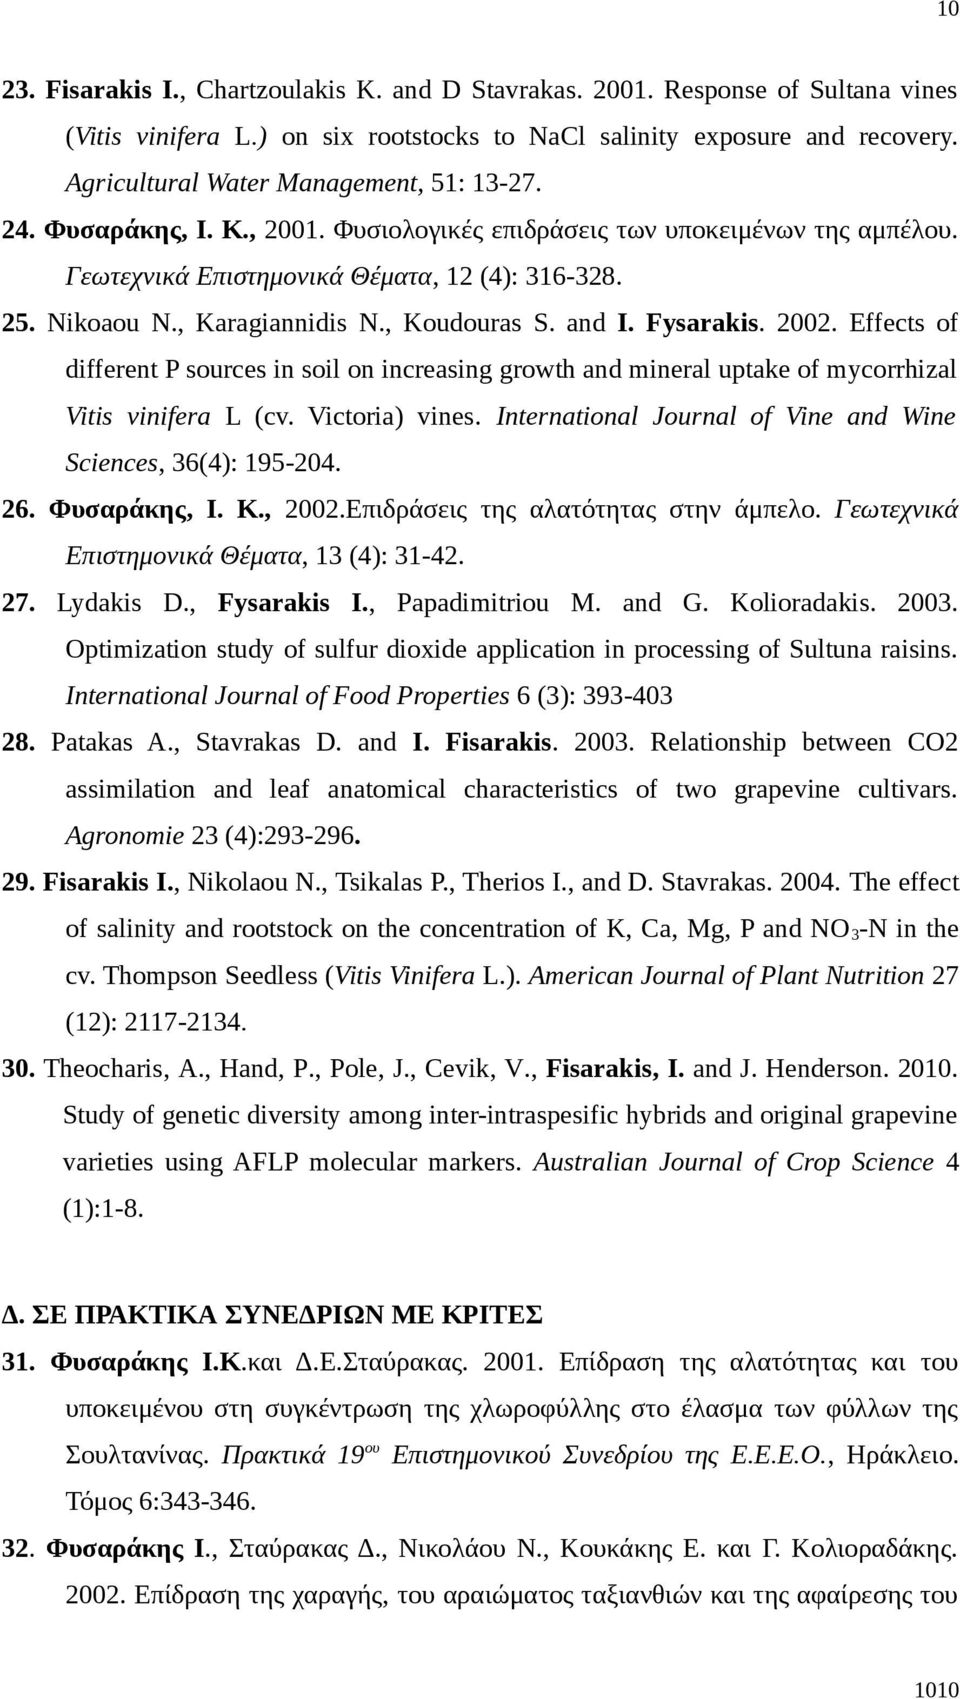 , Karagiannidis N., Koudouras S. and I. Fysarakis. 2002. Effects of different P sources in soil on increasing growth and mineral uptake of mycorrhizal Vitis vinifera L (cv. Victoria) vines.